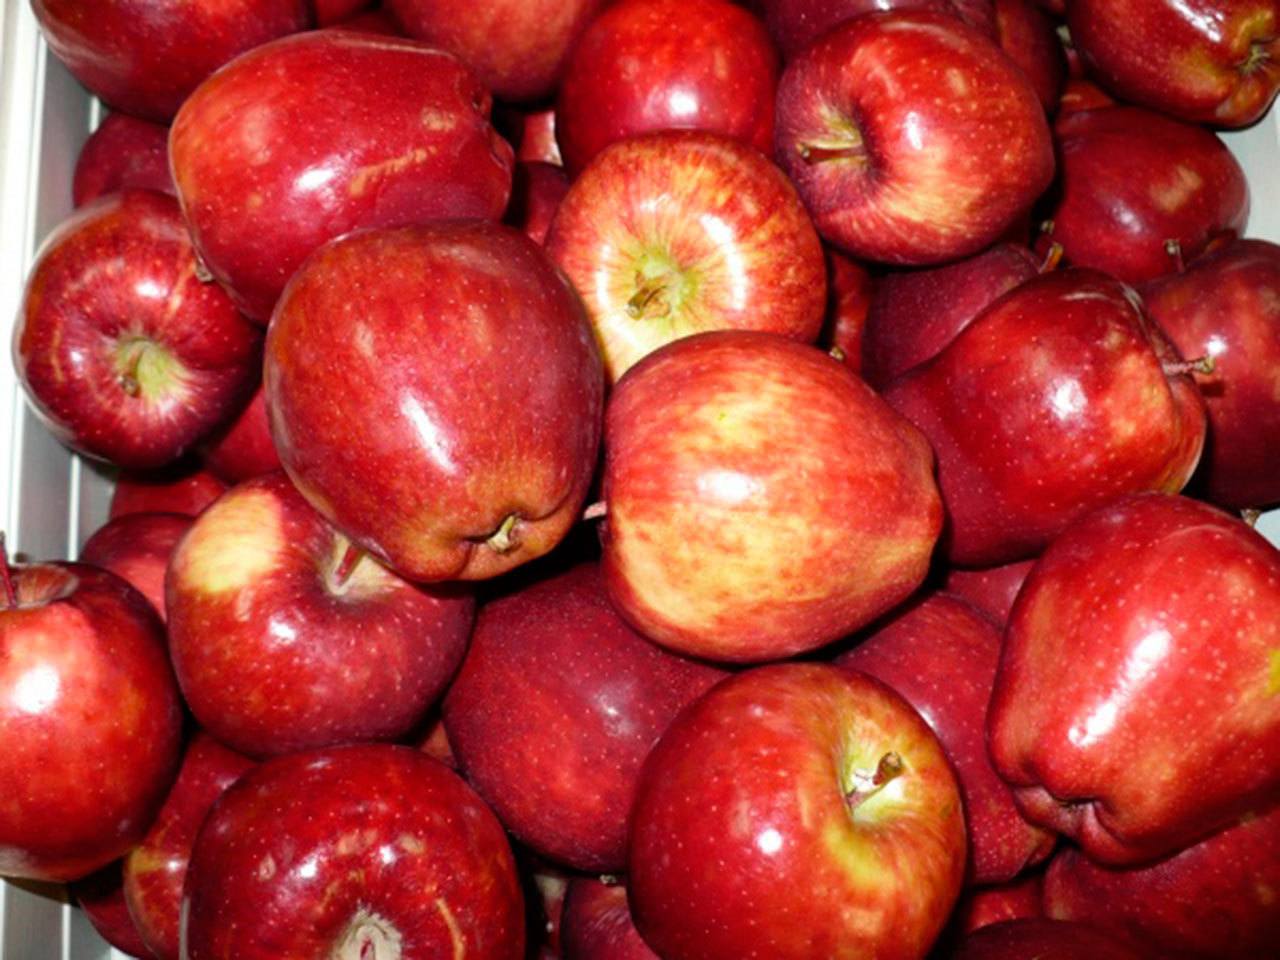 Our state’s growers lost $95 million in overseas sales. Foreign buyers, while preferring the quality of Washington apples, looked elsewhere to fill the void.